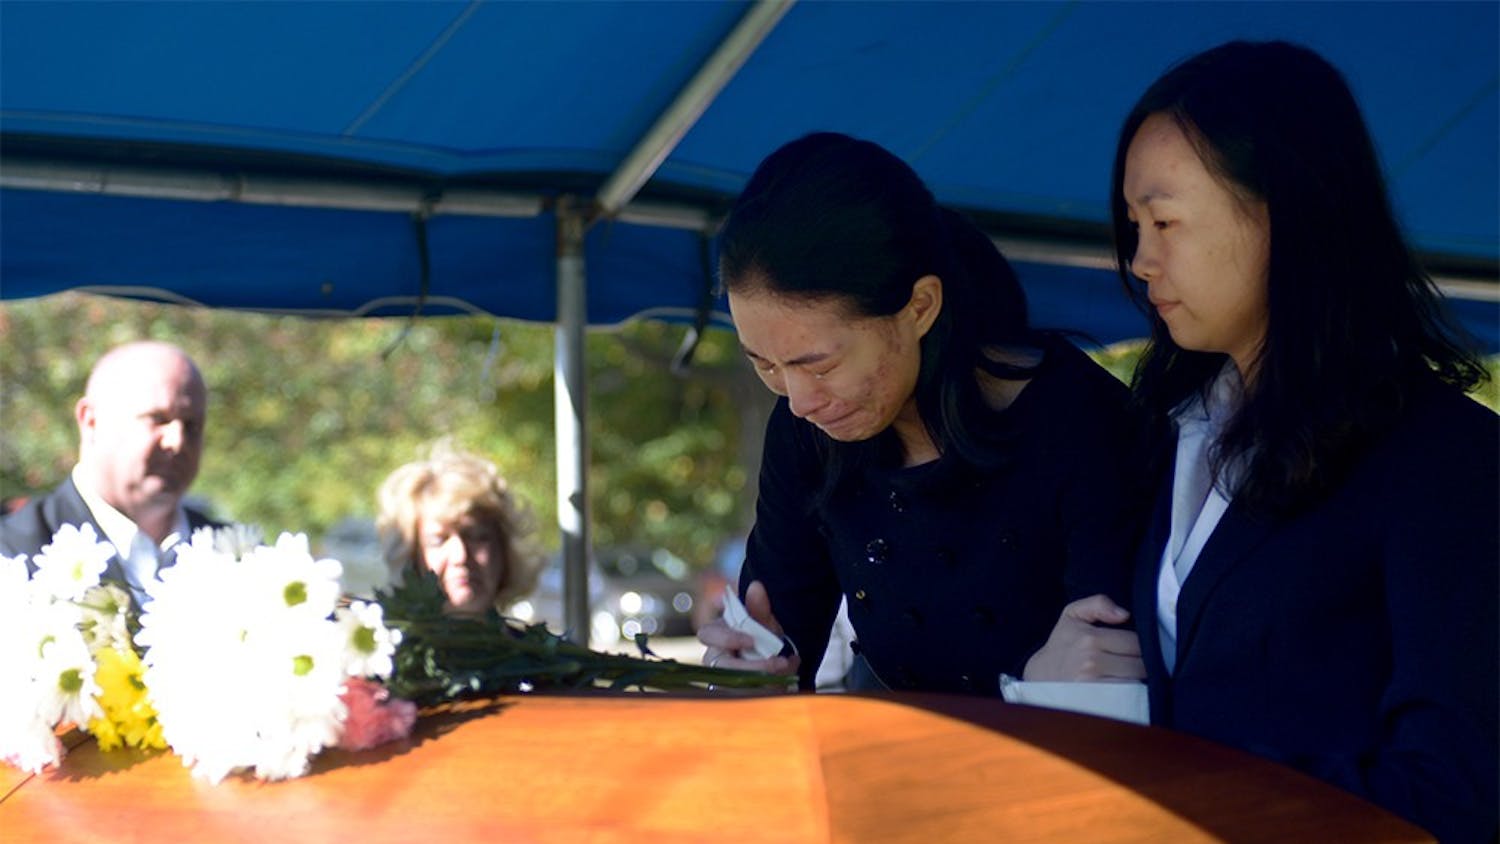 Yan Li, Yaolin Wang's cousin, holds Jielin Wang, Wang's sister, in front of Yaolin's casket before it went underground during the burial service on Oct.11.  Jielin was the last one to leave after the casket was in the ground.